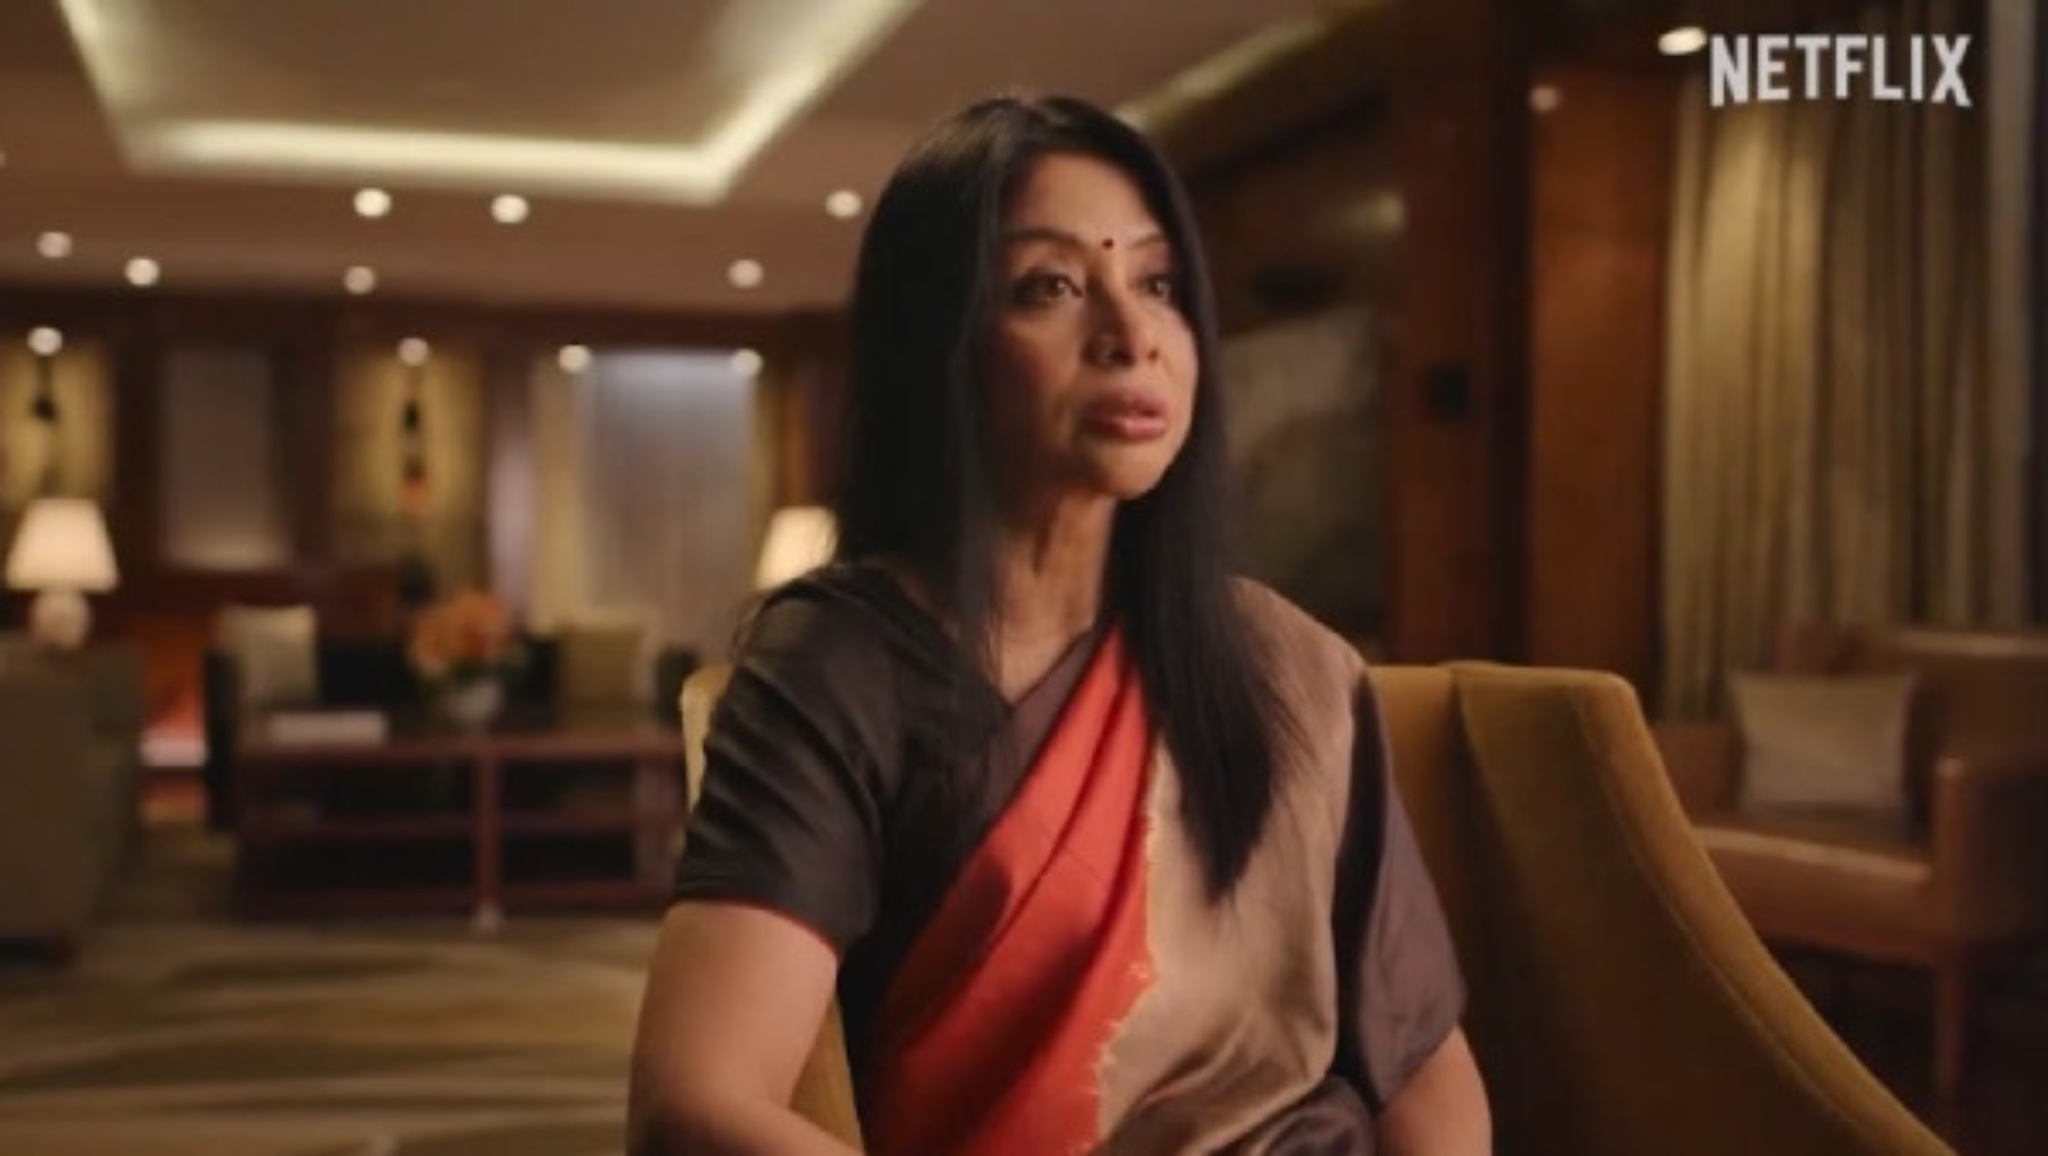 Indrani Mukerjea: From Media Magnate to Controversy's Epicenter